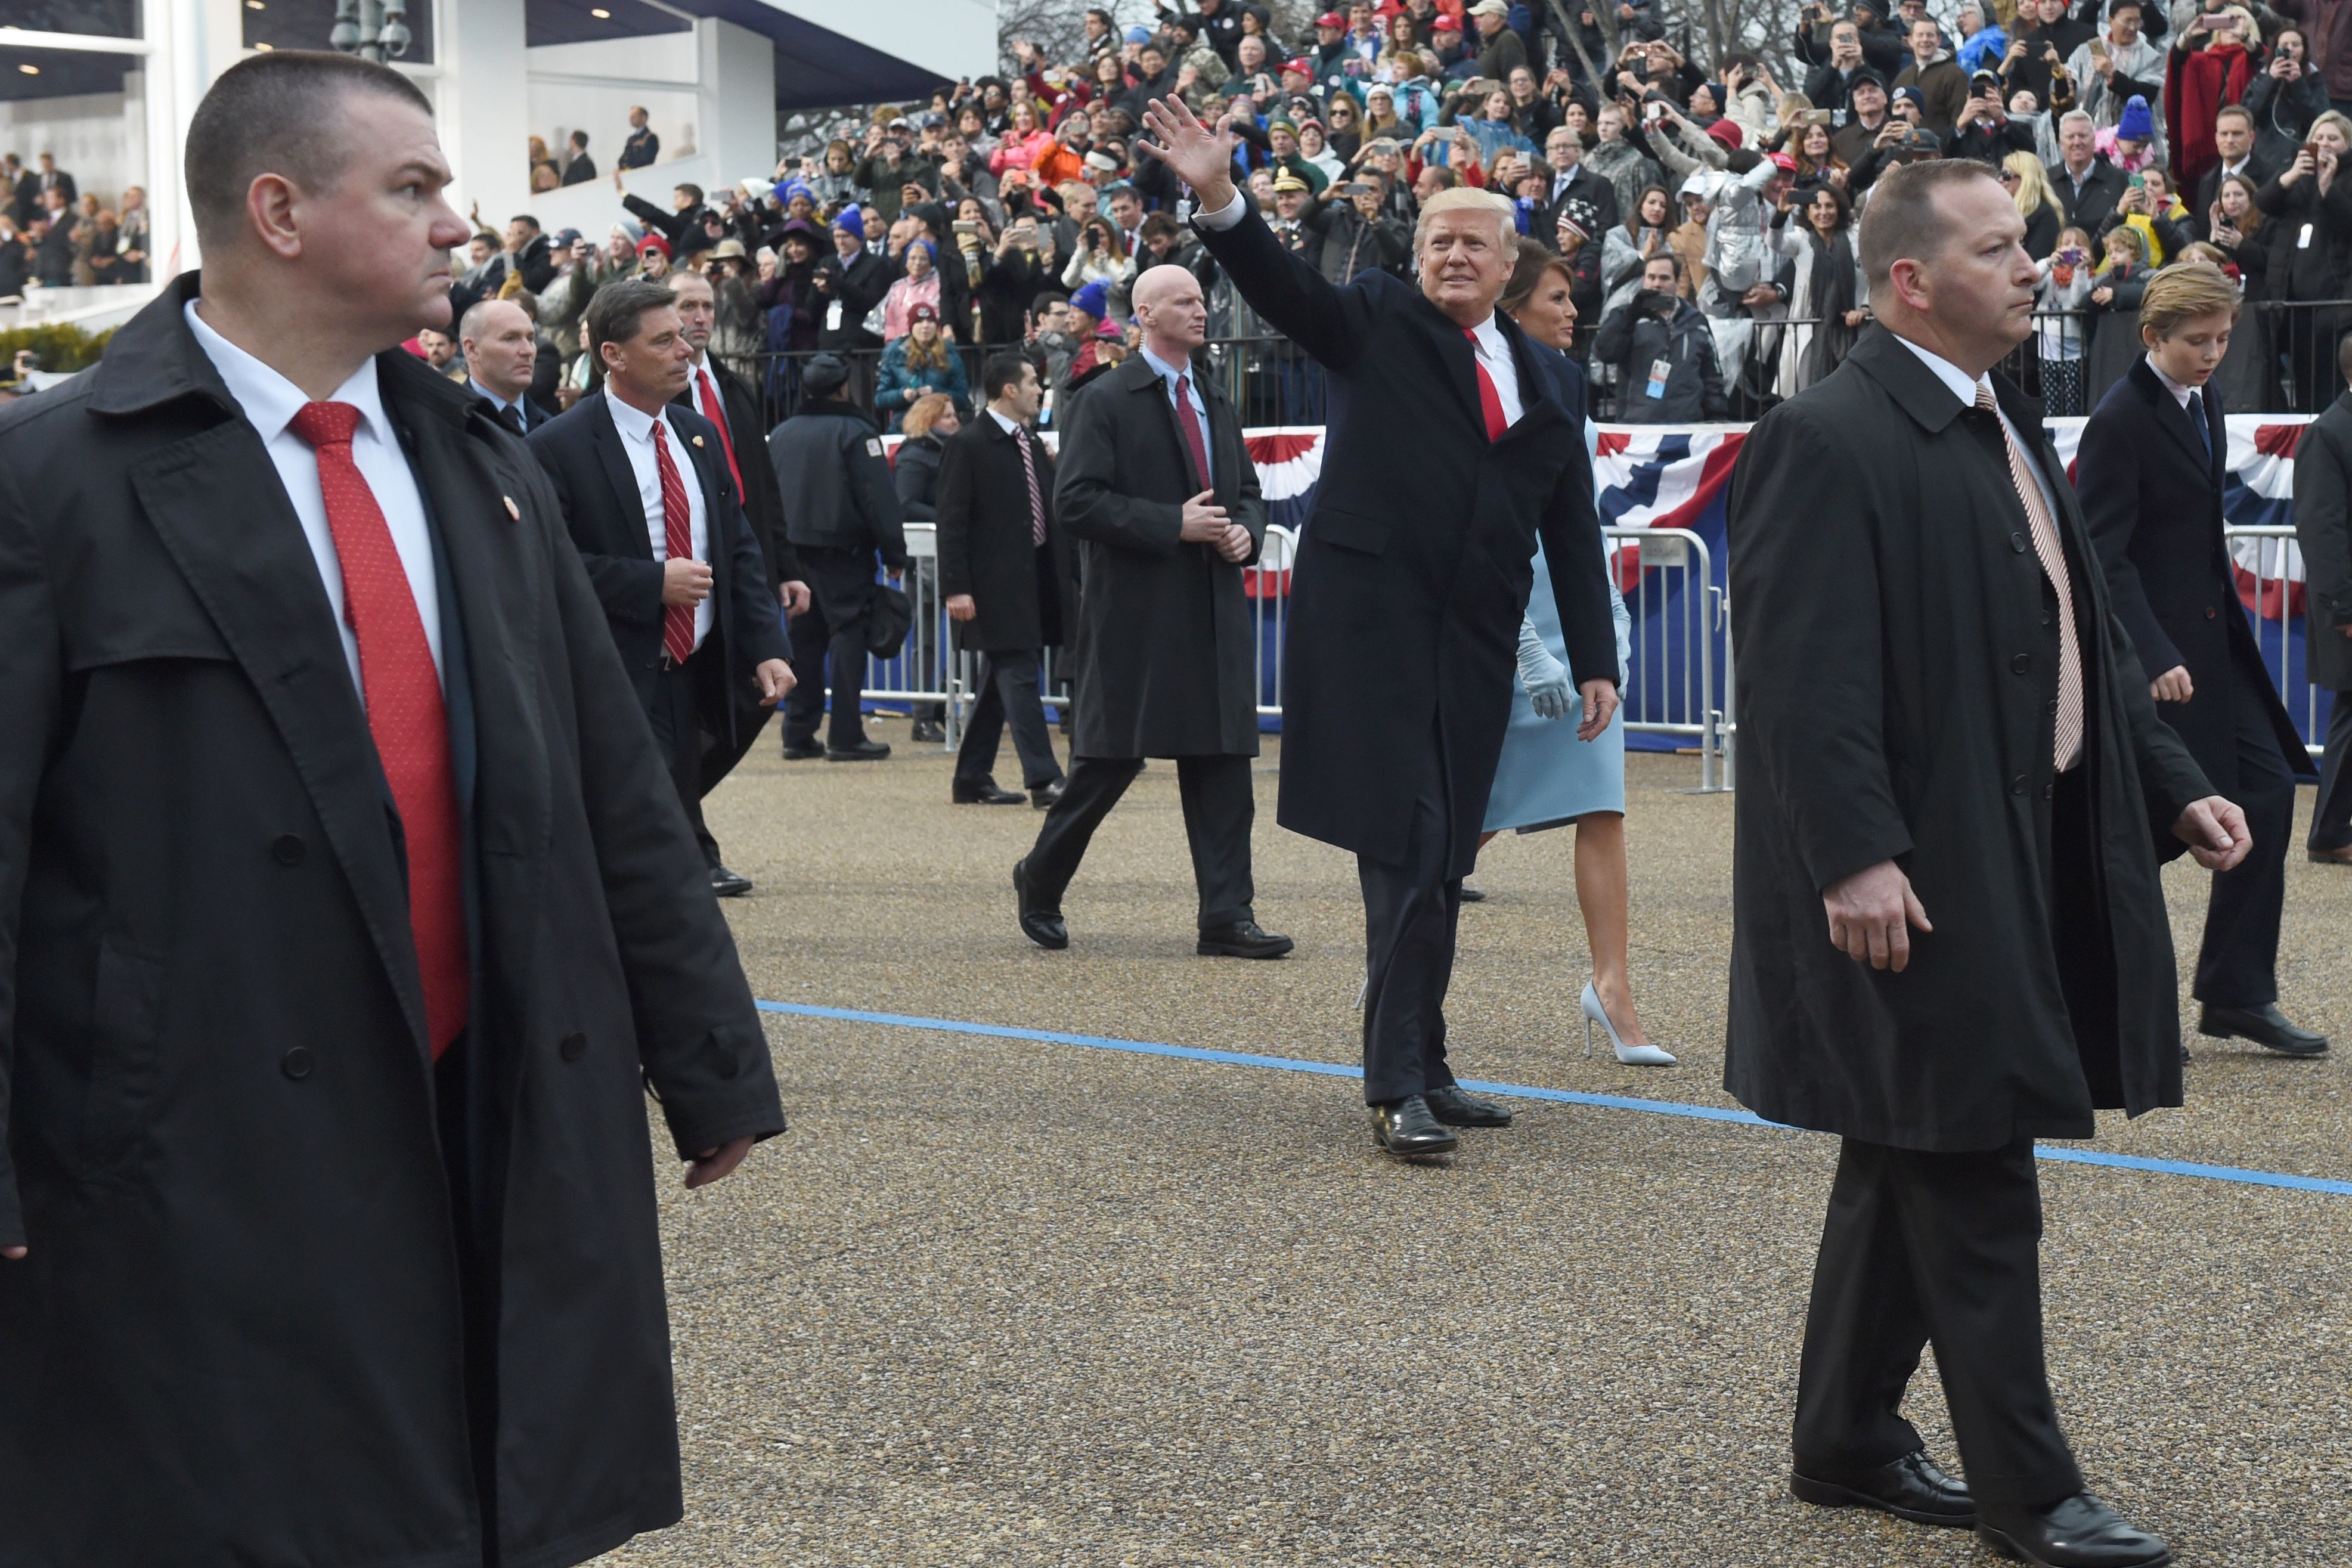 US President Donald Trump walks with his wife Melania surrounded by Secret Service officers outside the White House as the presidential inaugural parade winds through the nation's capital on January 20, 2017 in Washington, DC. TIMOTHY A. CLARY/AFP/Getty Images